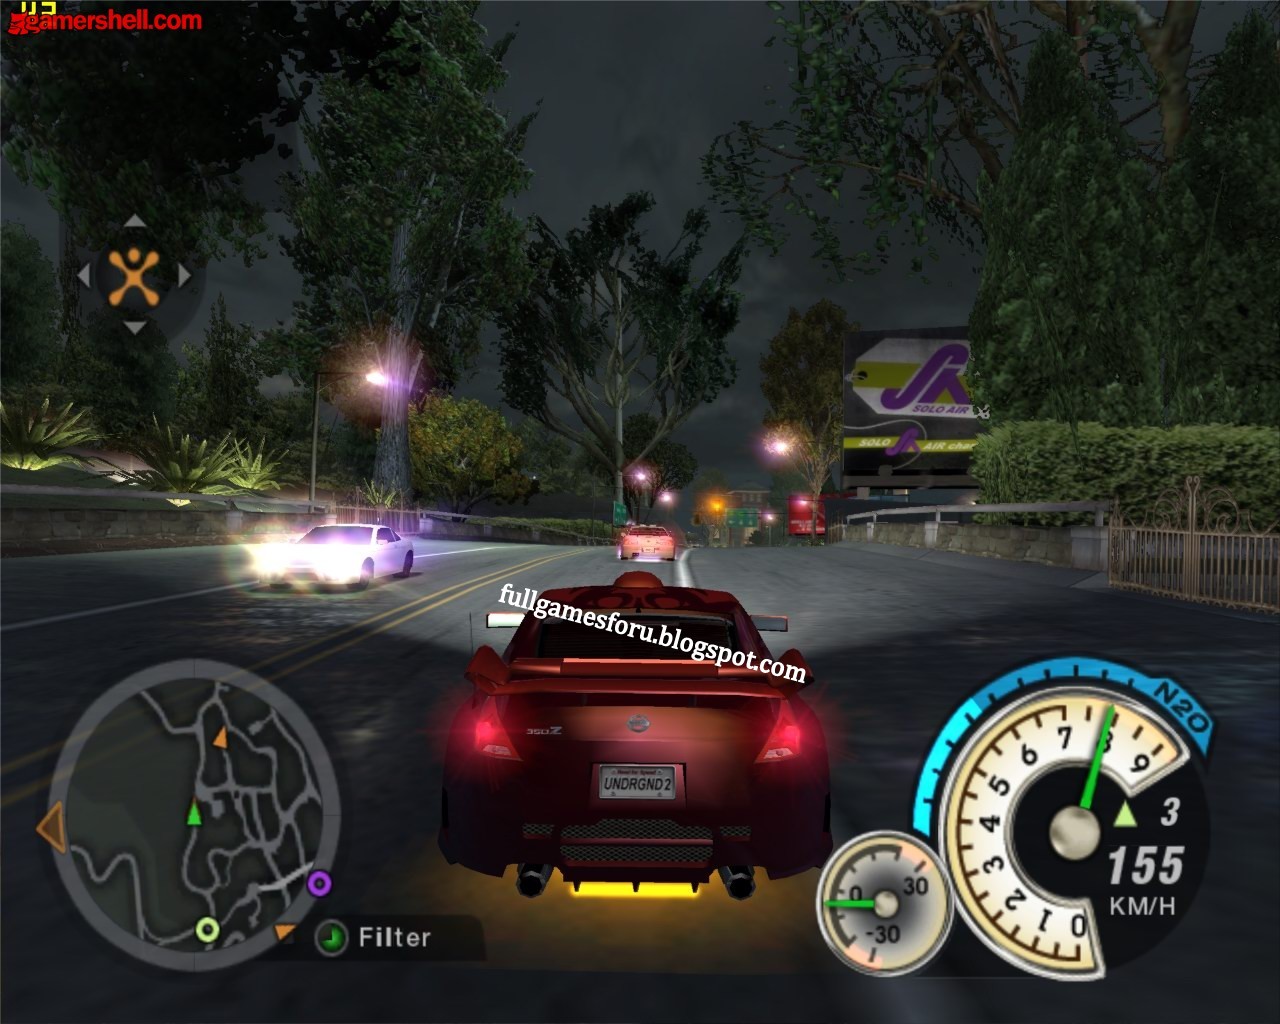 download need for speed underground 1 pc full version